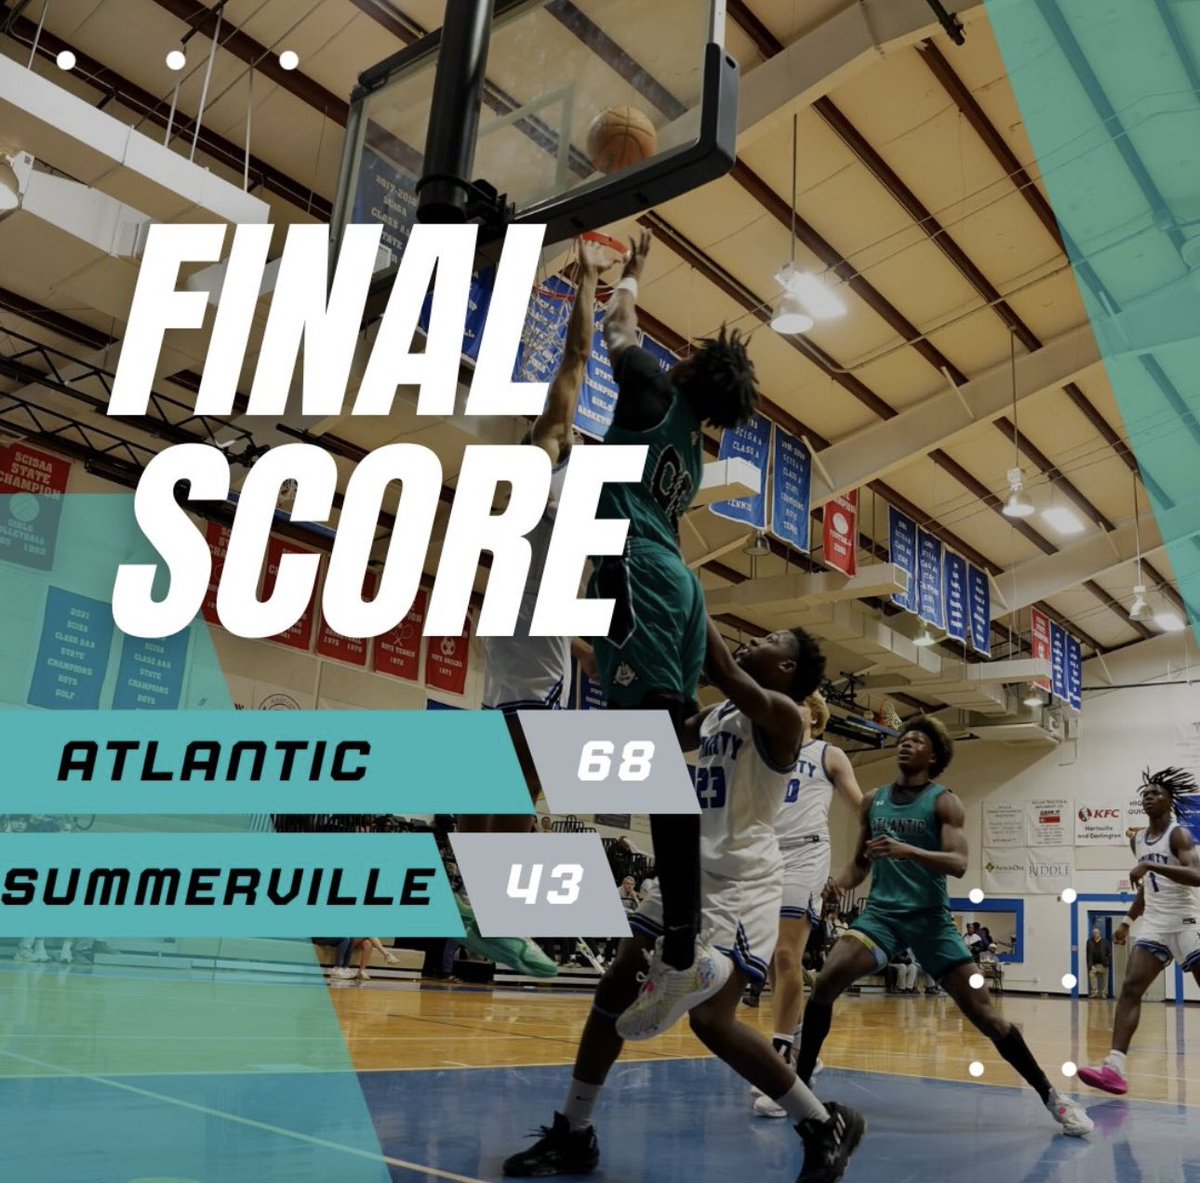 What a game by @ACABBasketball !!!! They go down to Charleston and play good team basketball to take down Summerville by a score of 68-43! So proud of this team and @ACACoachJH3!